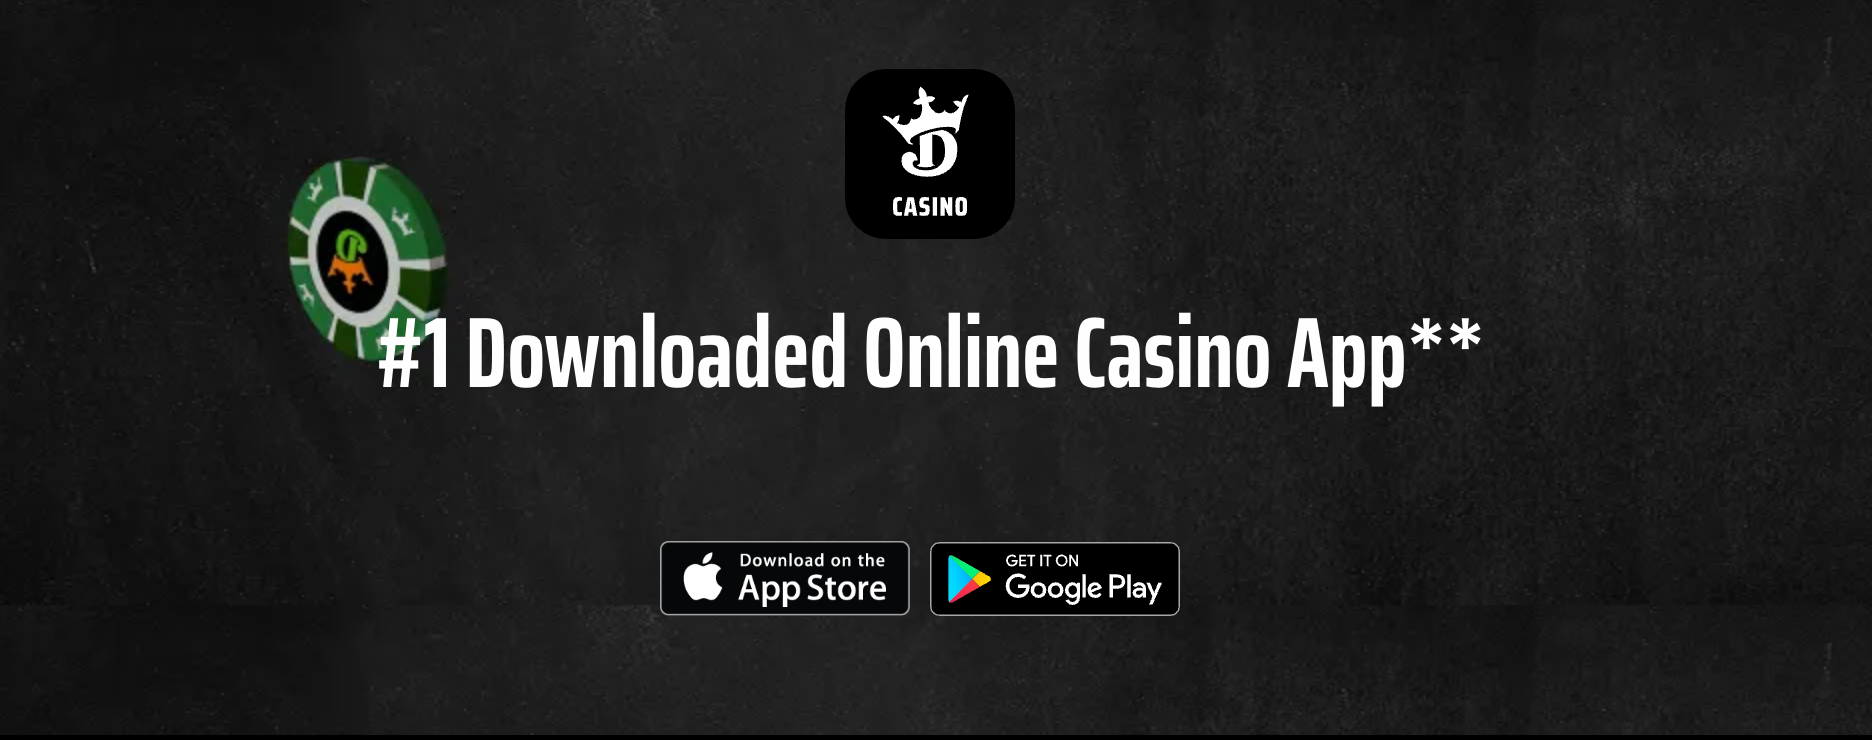 Image of the available App stores where you can download the DraftKings Casino app